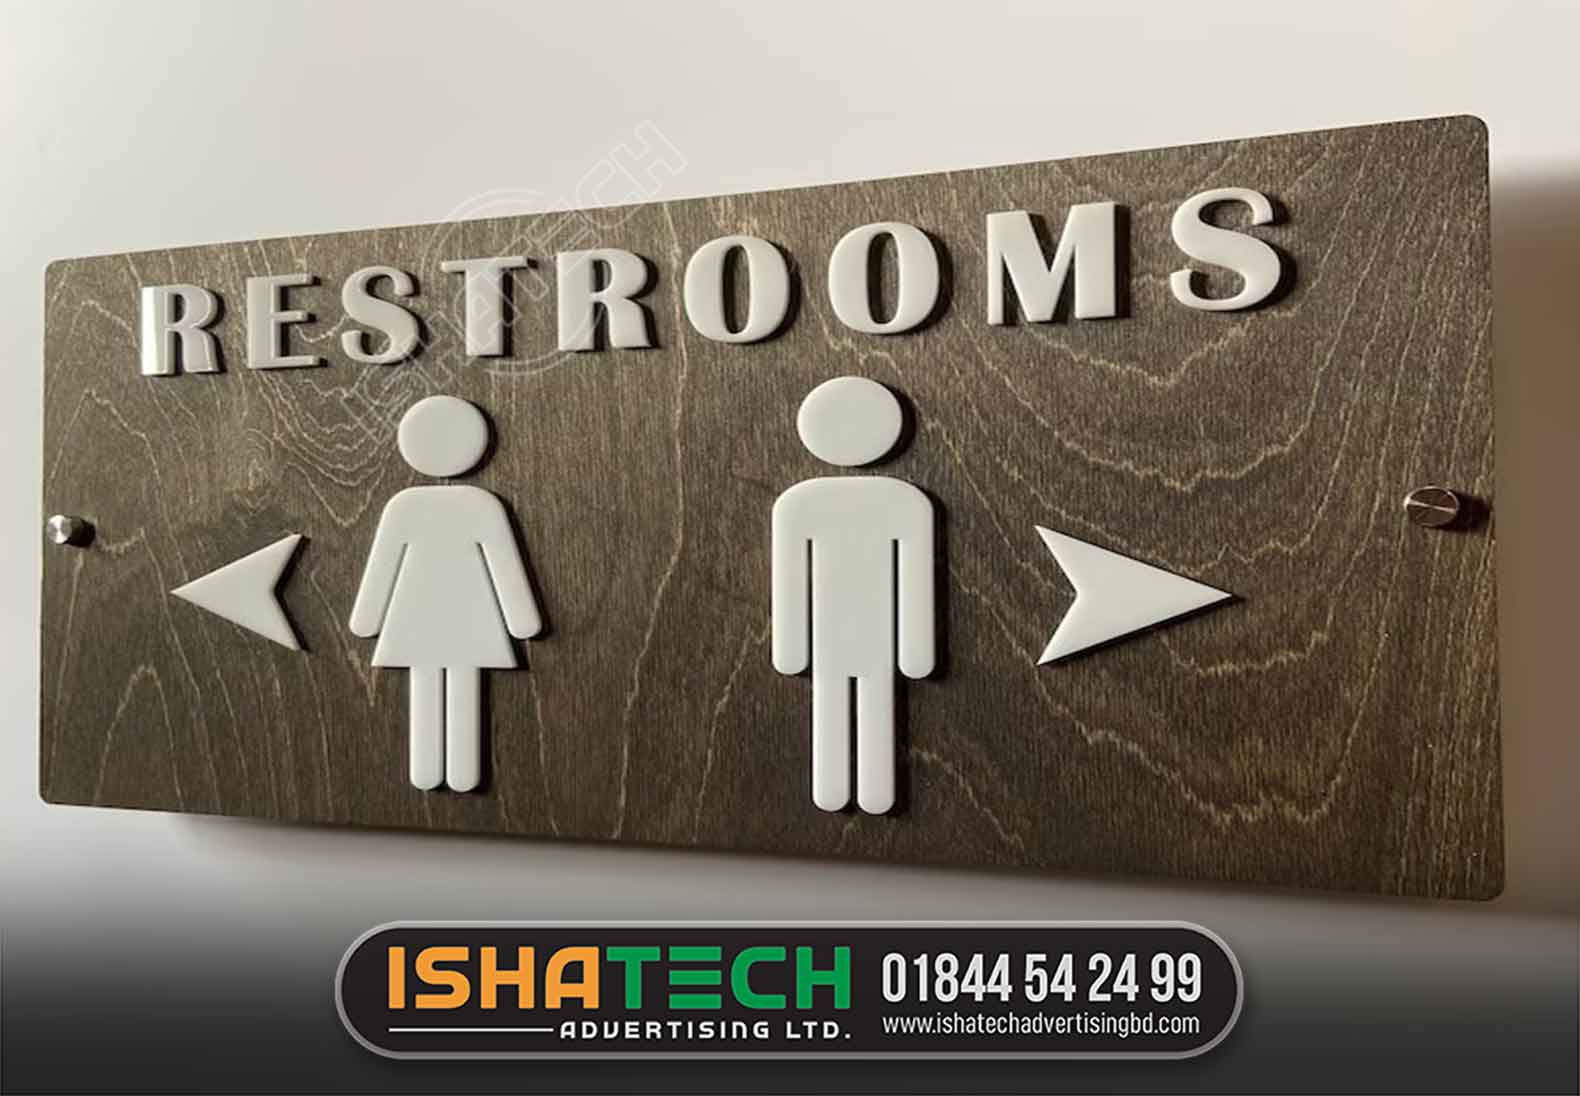 RESTROOMS ACRYLIC NAME PLATE, MEN WOMEN ACRYLIC ICON NAME PLATE MAKING BY ISHATECH ADVERTISING LTD